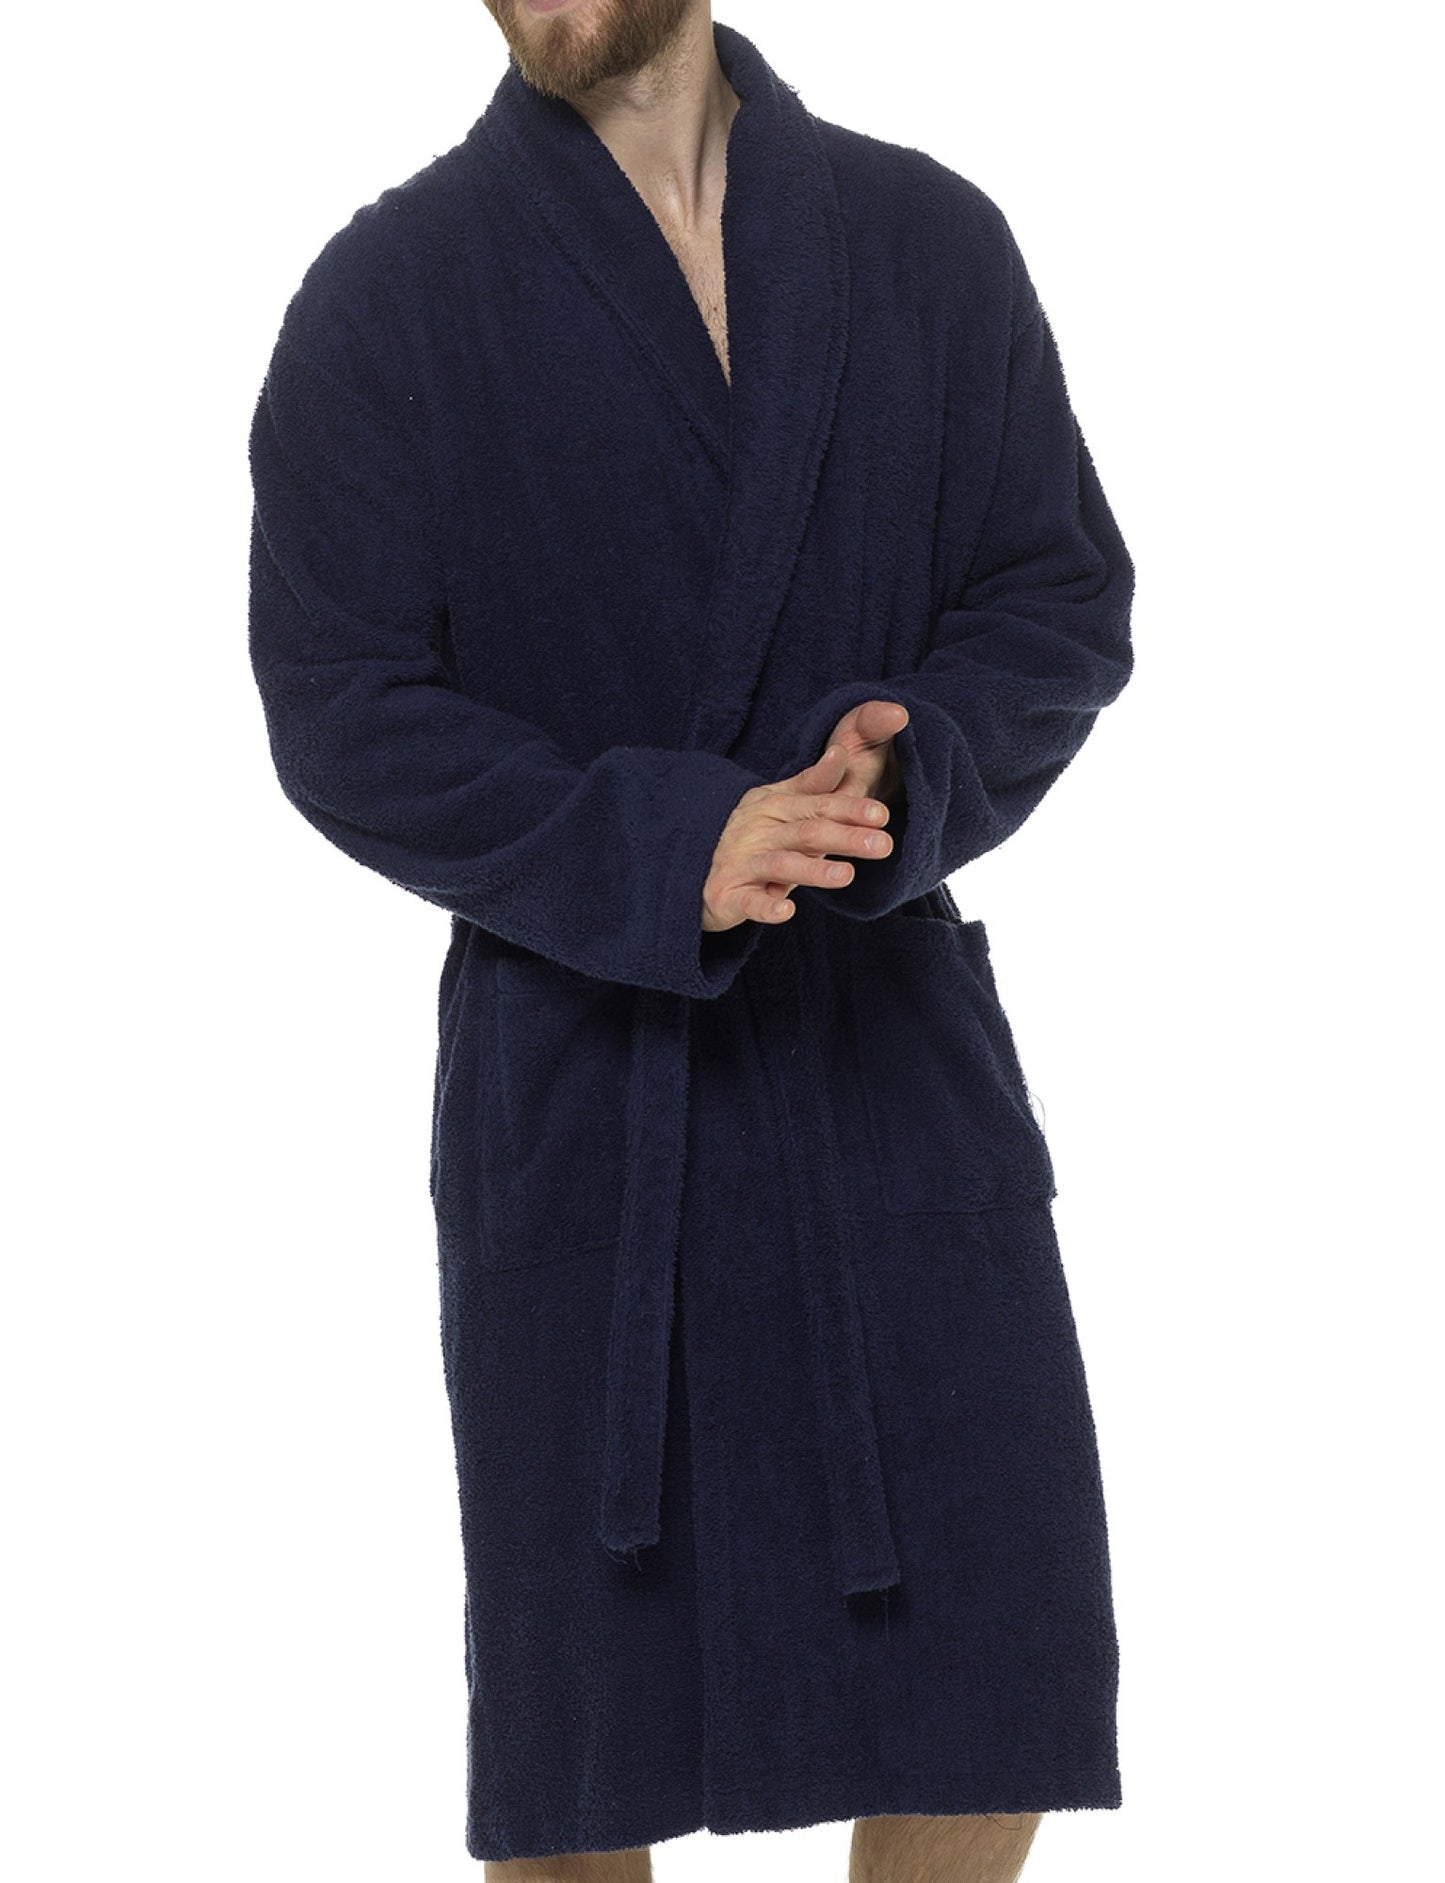 Men's 100% Cotton Towelling Spa Bath Robe Dressing Gown